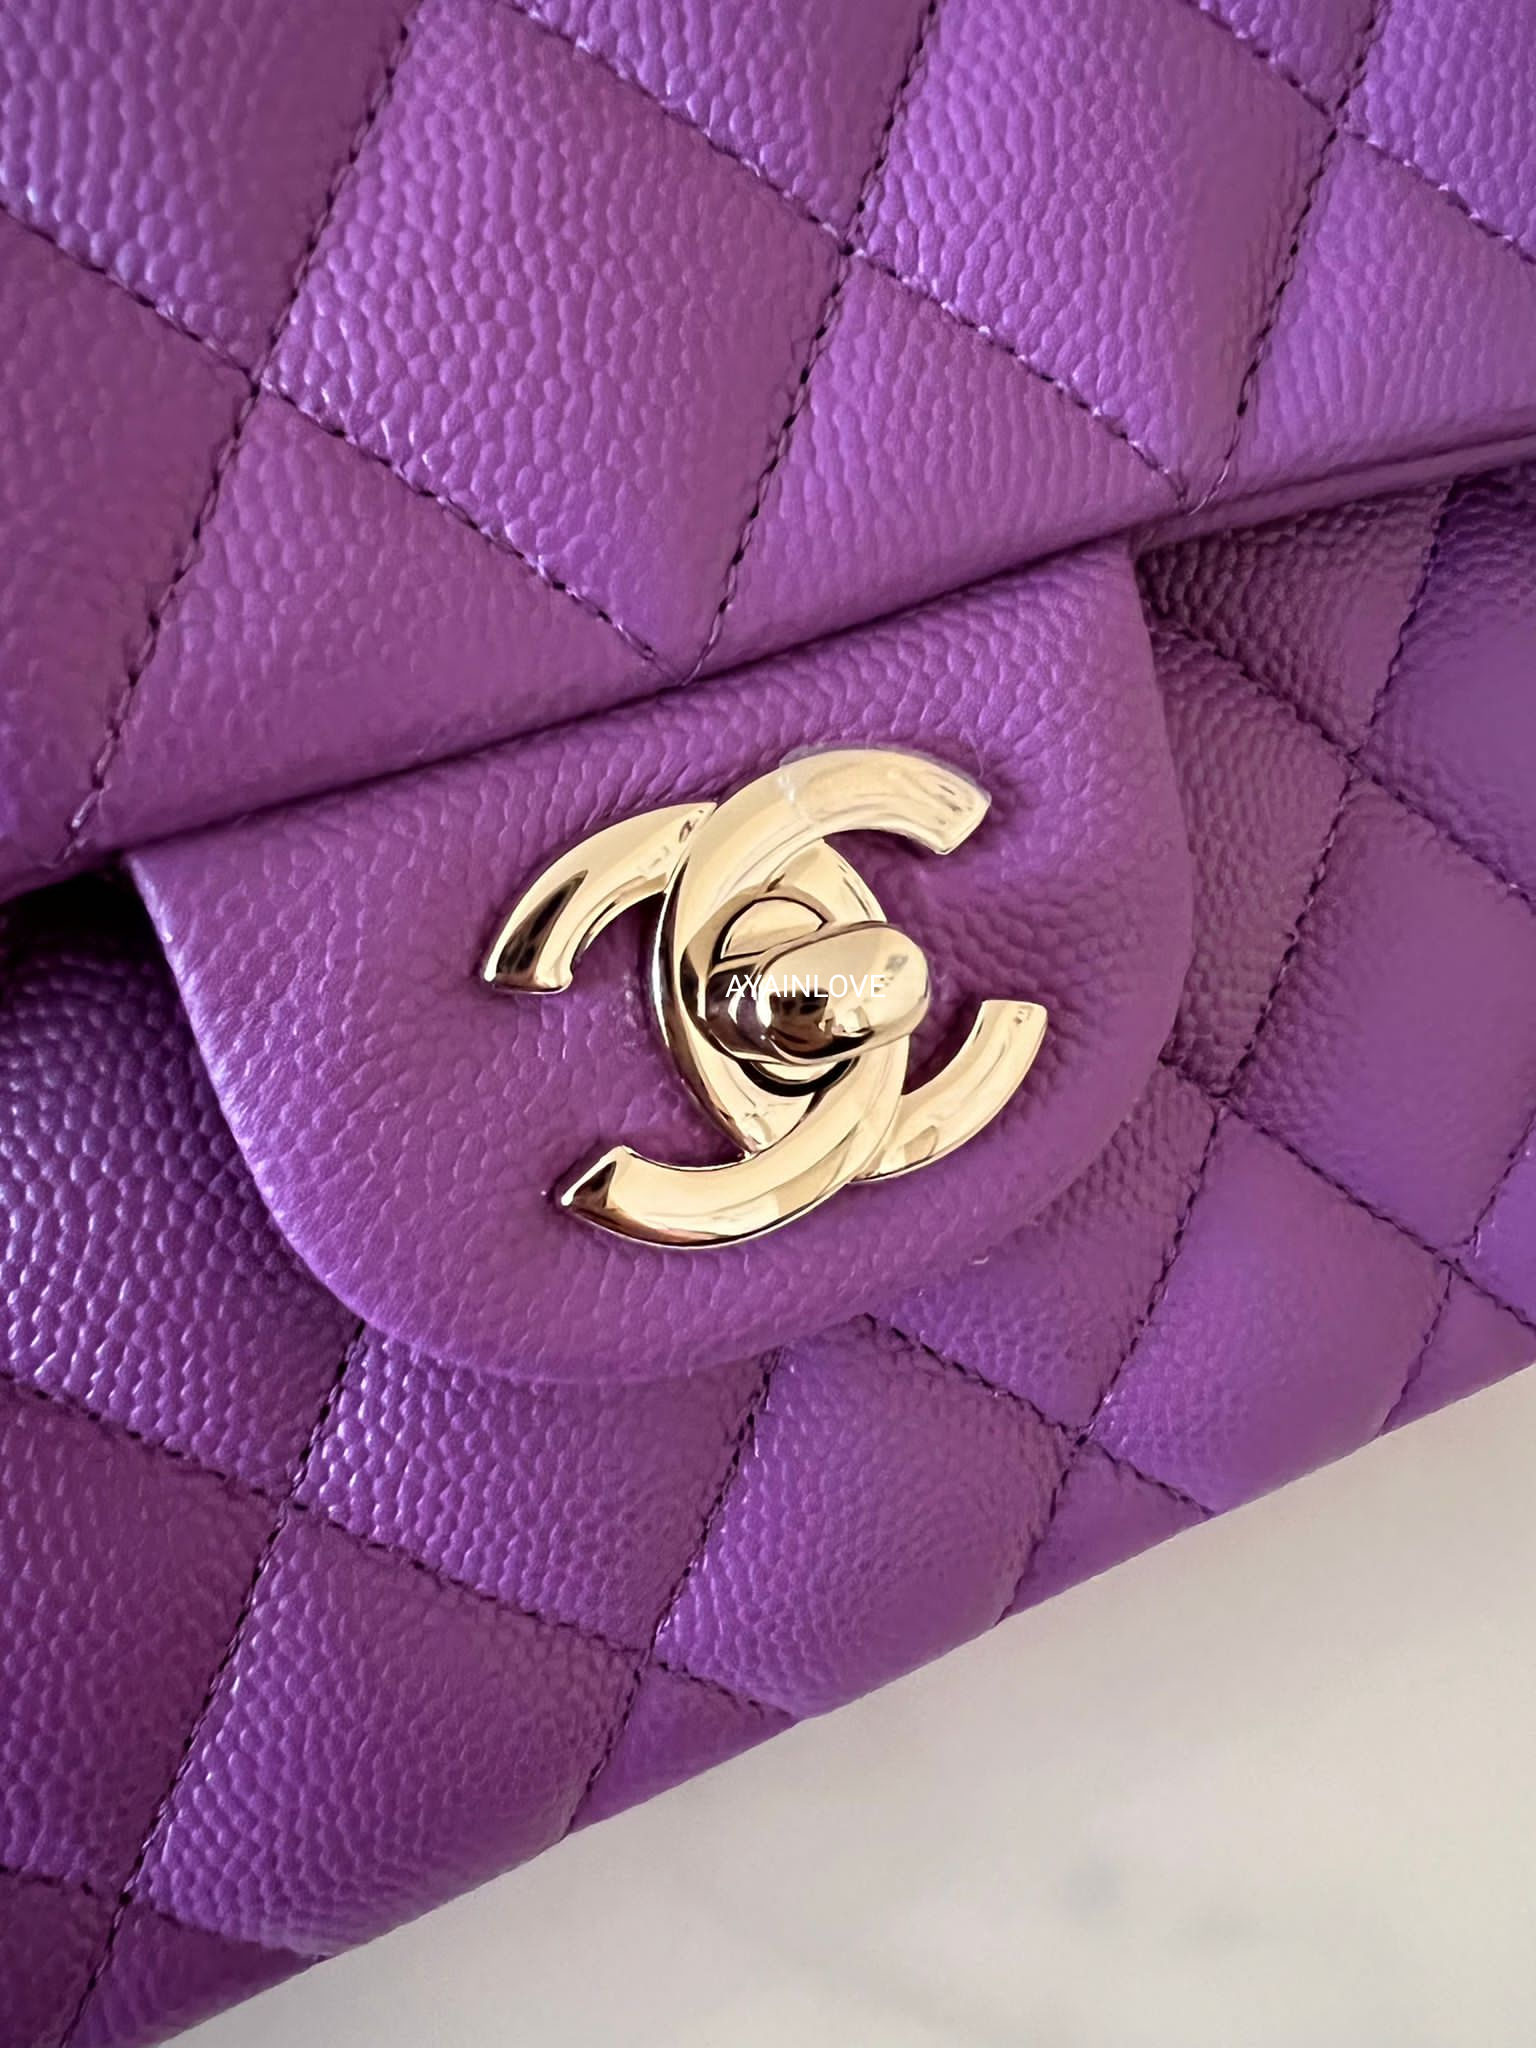 Timeless 21S NC022 Chanel Classic lined Flap Caviar Leather Lilac Pink  ref.501535 - Joli Closet